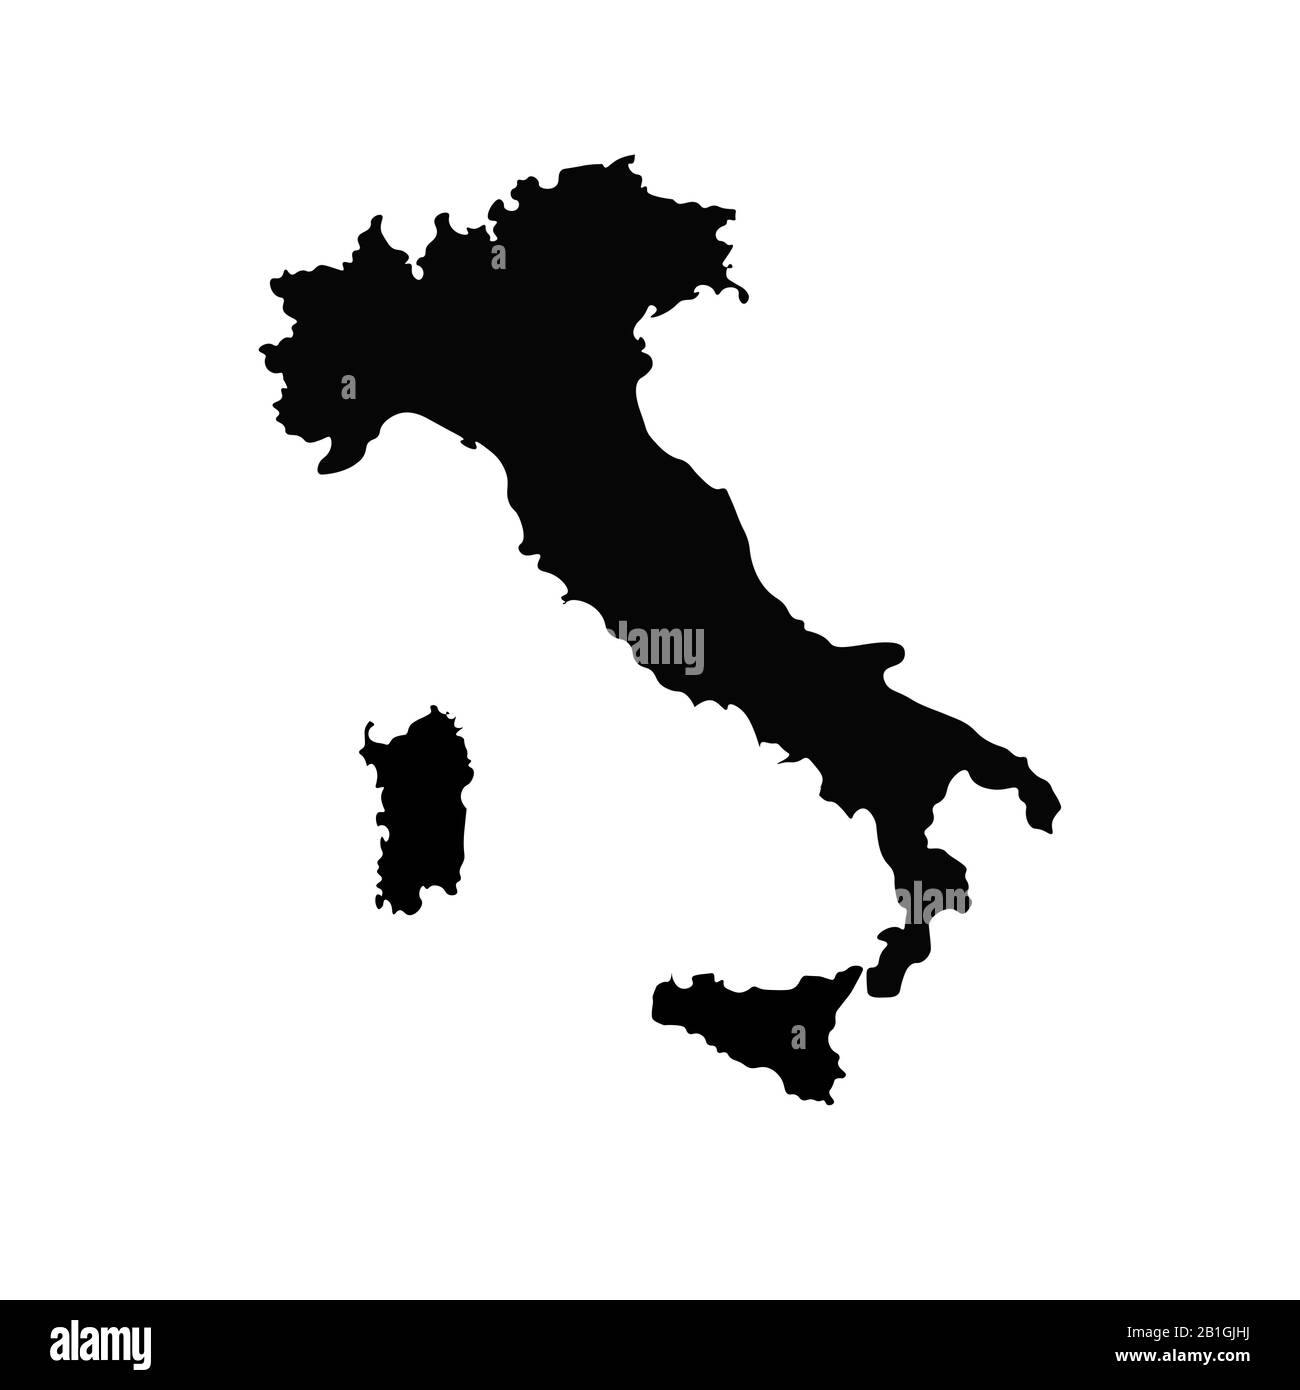 Silhouette of Italy country on a white background. Raster illustration. Stock Photo